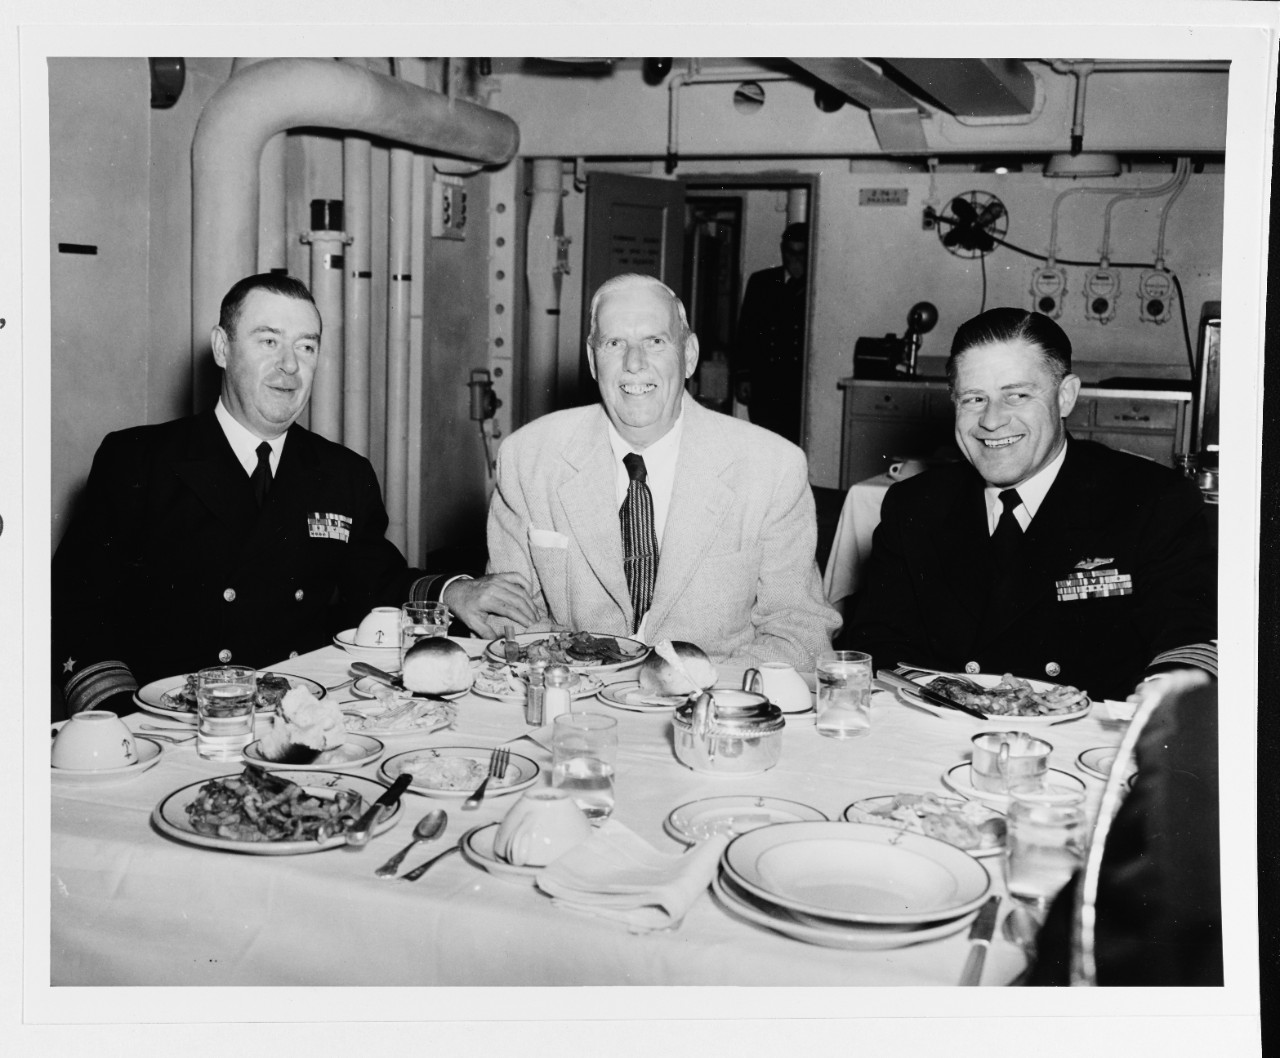 Rear Admiral Francis X. McInerney, USN, an unidentified civilian, and Captain William P. Burford